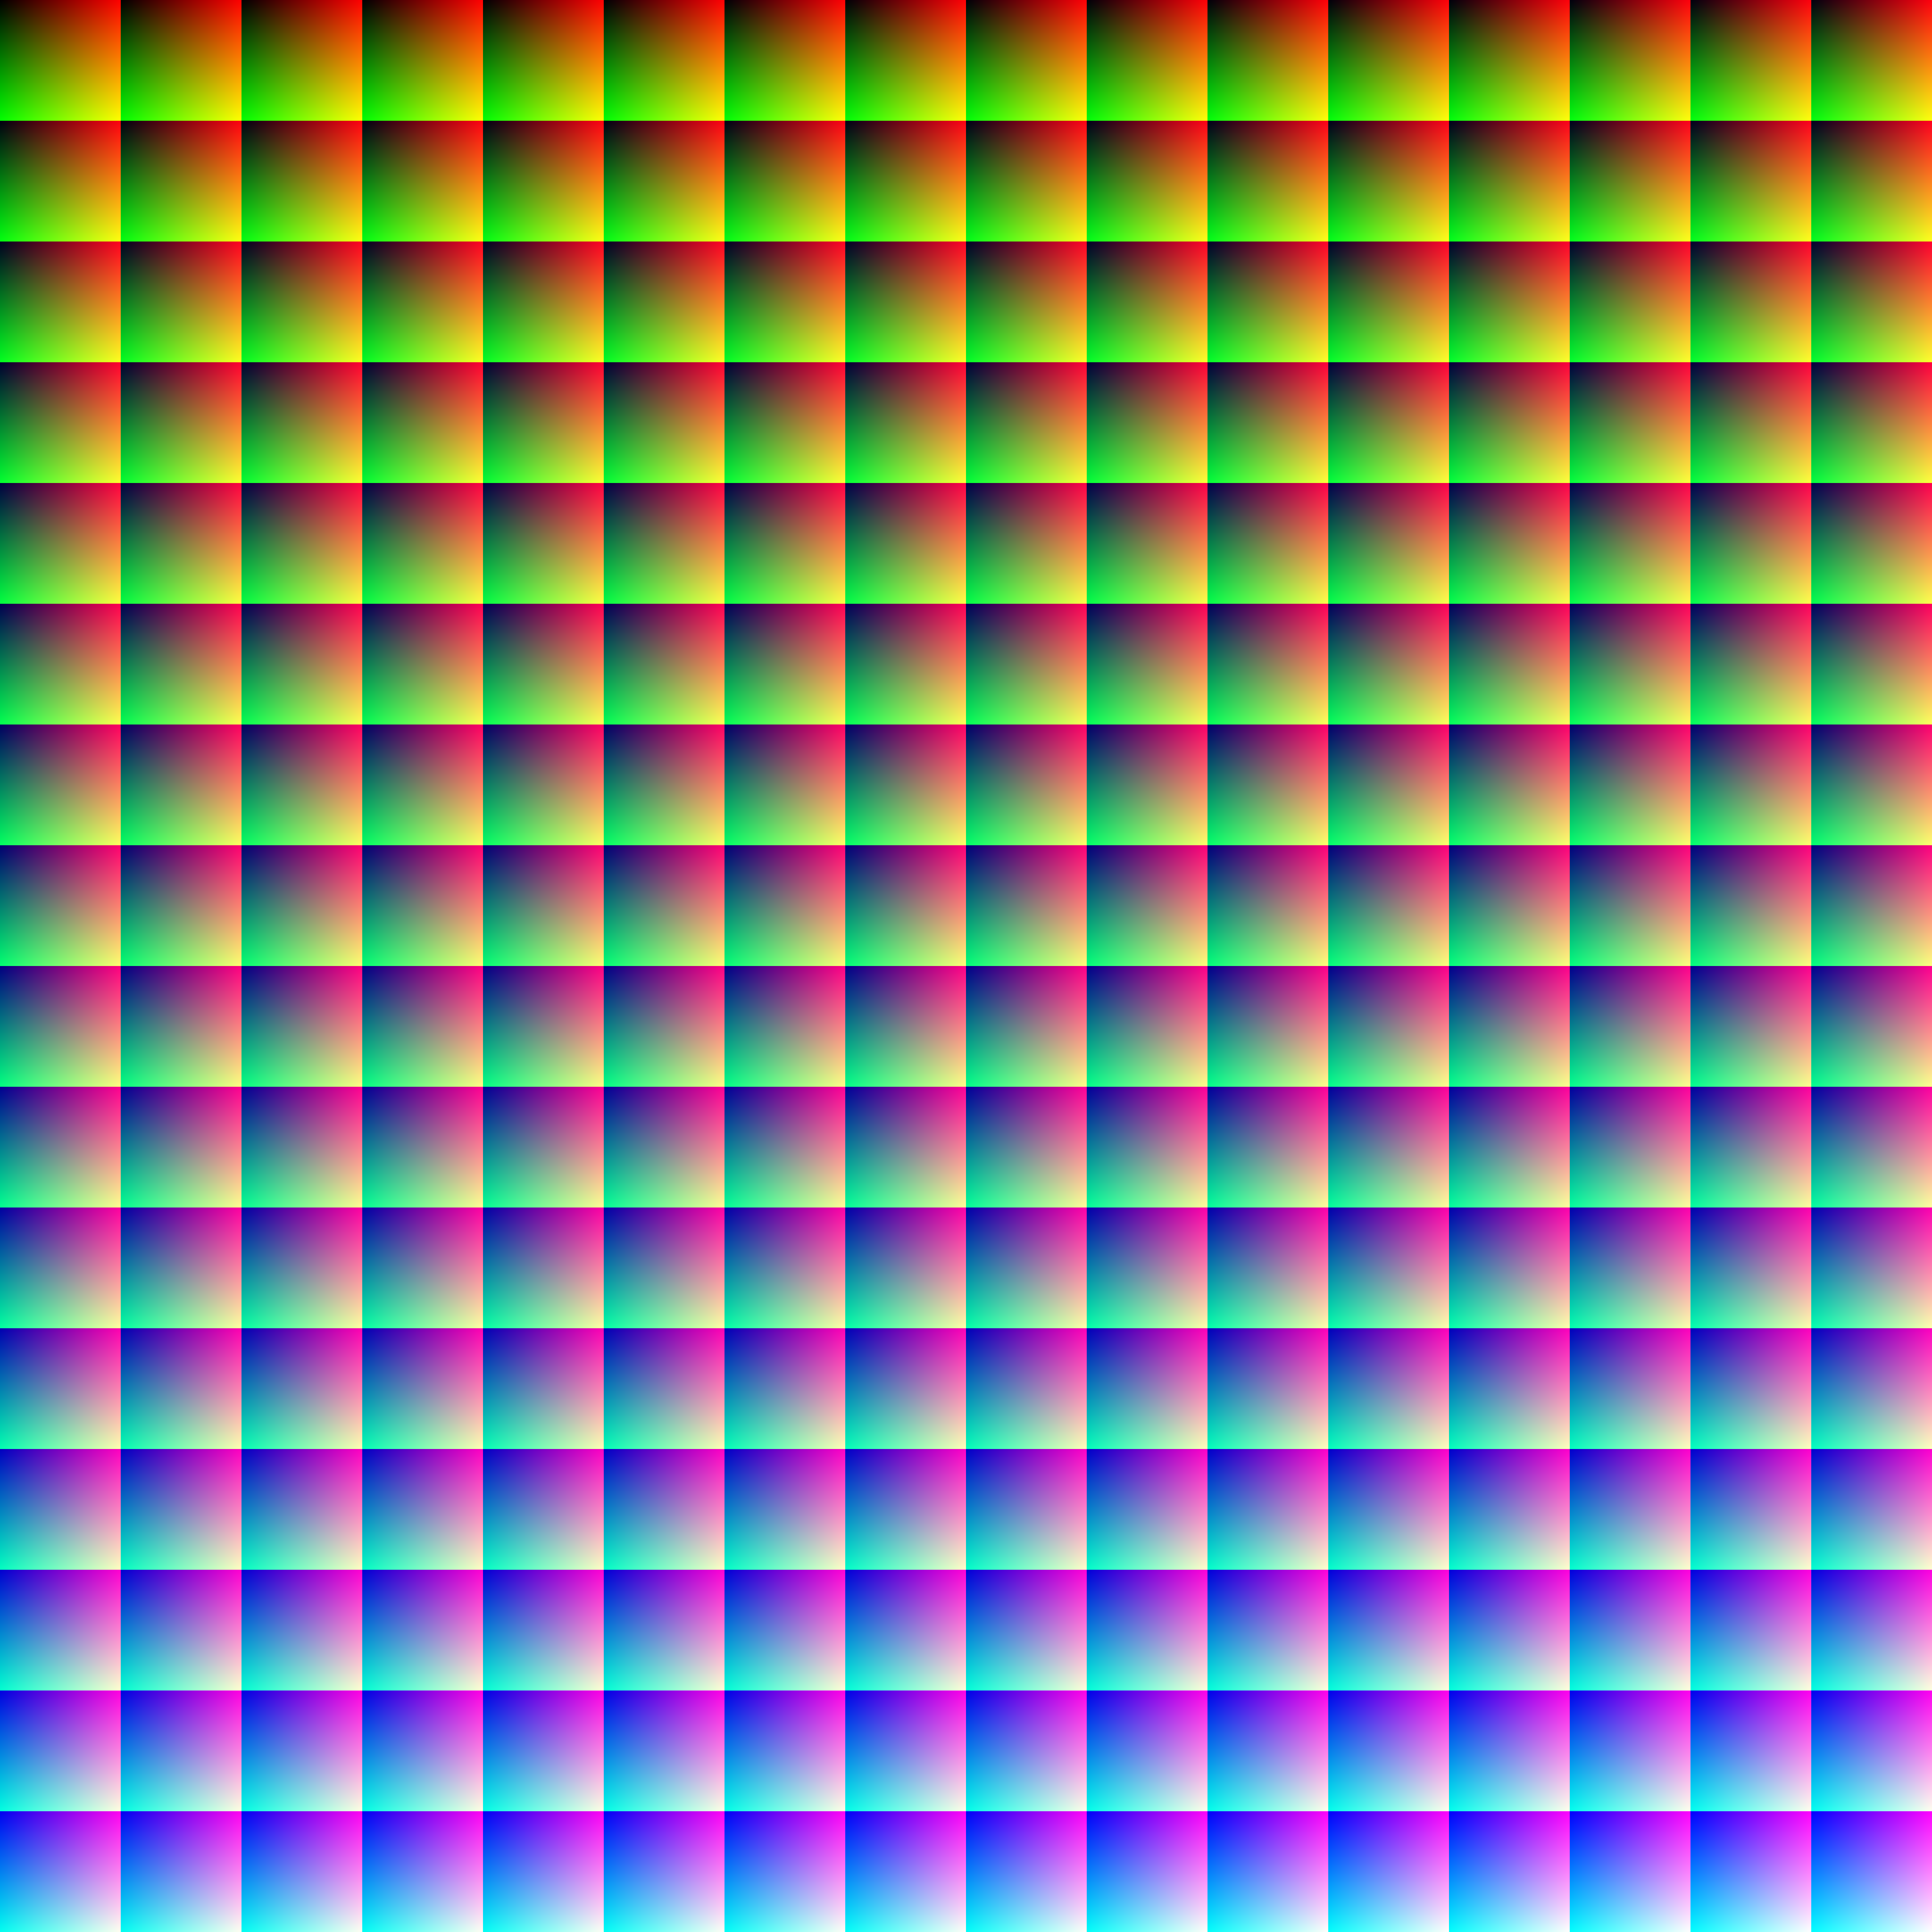 bmp-implementation-in-c_all-sixteen-million-colors.png